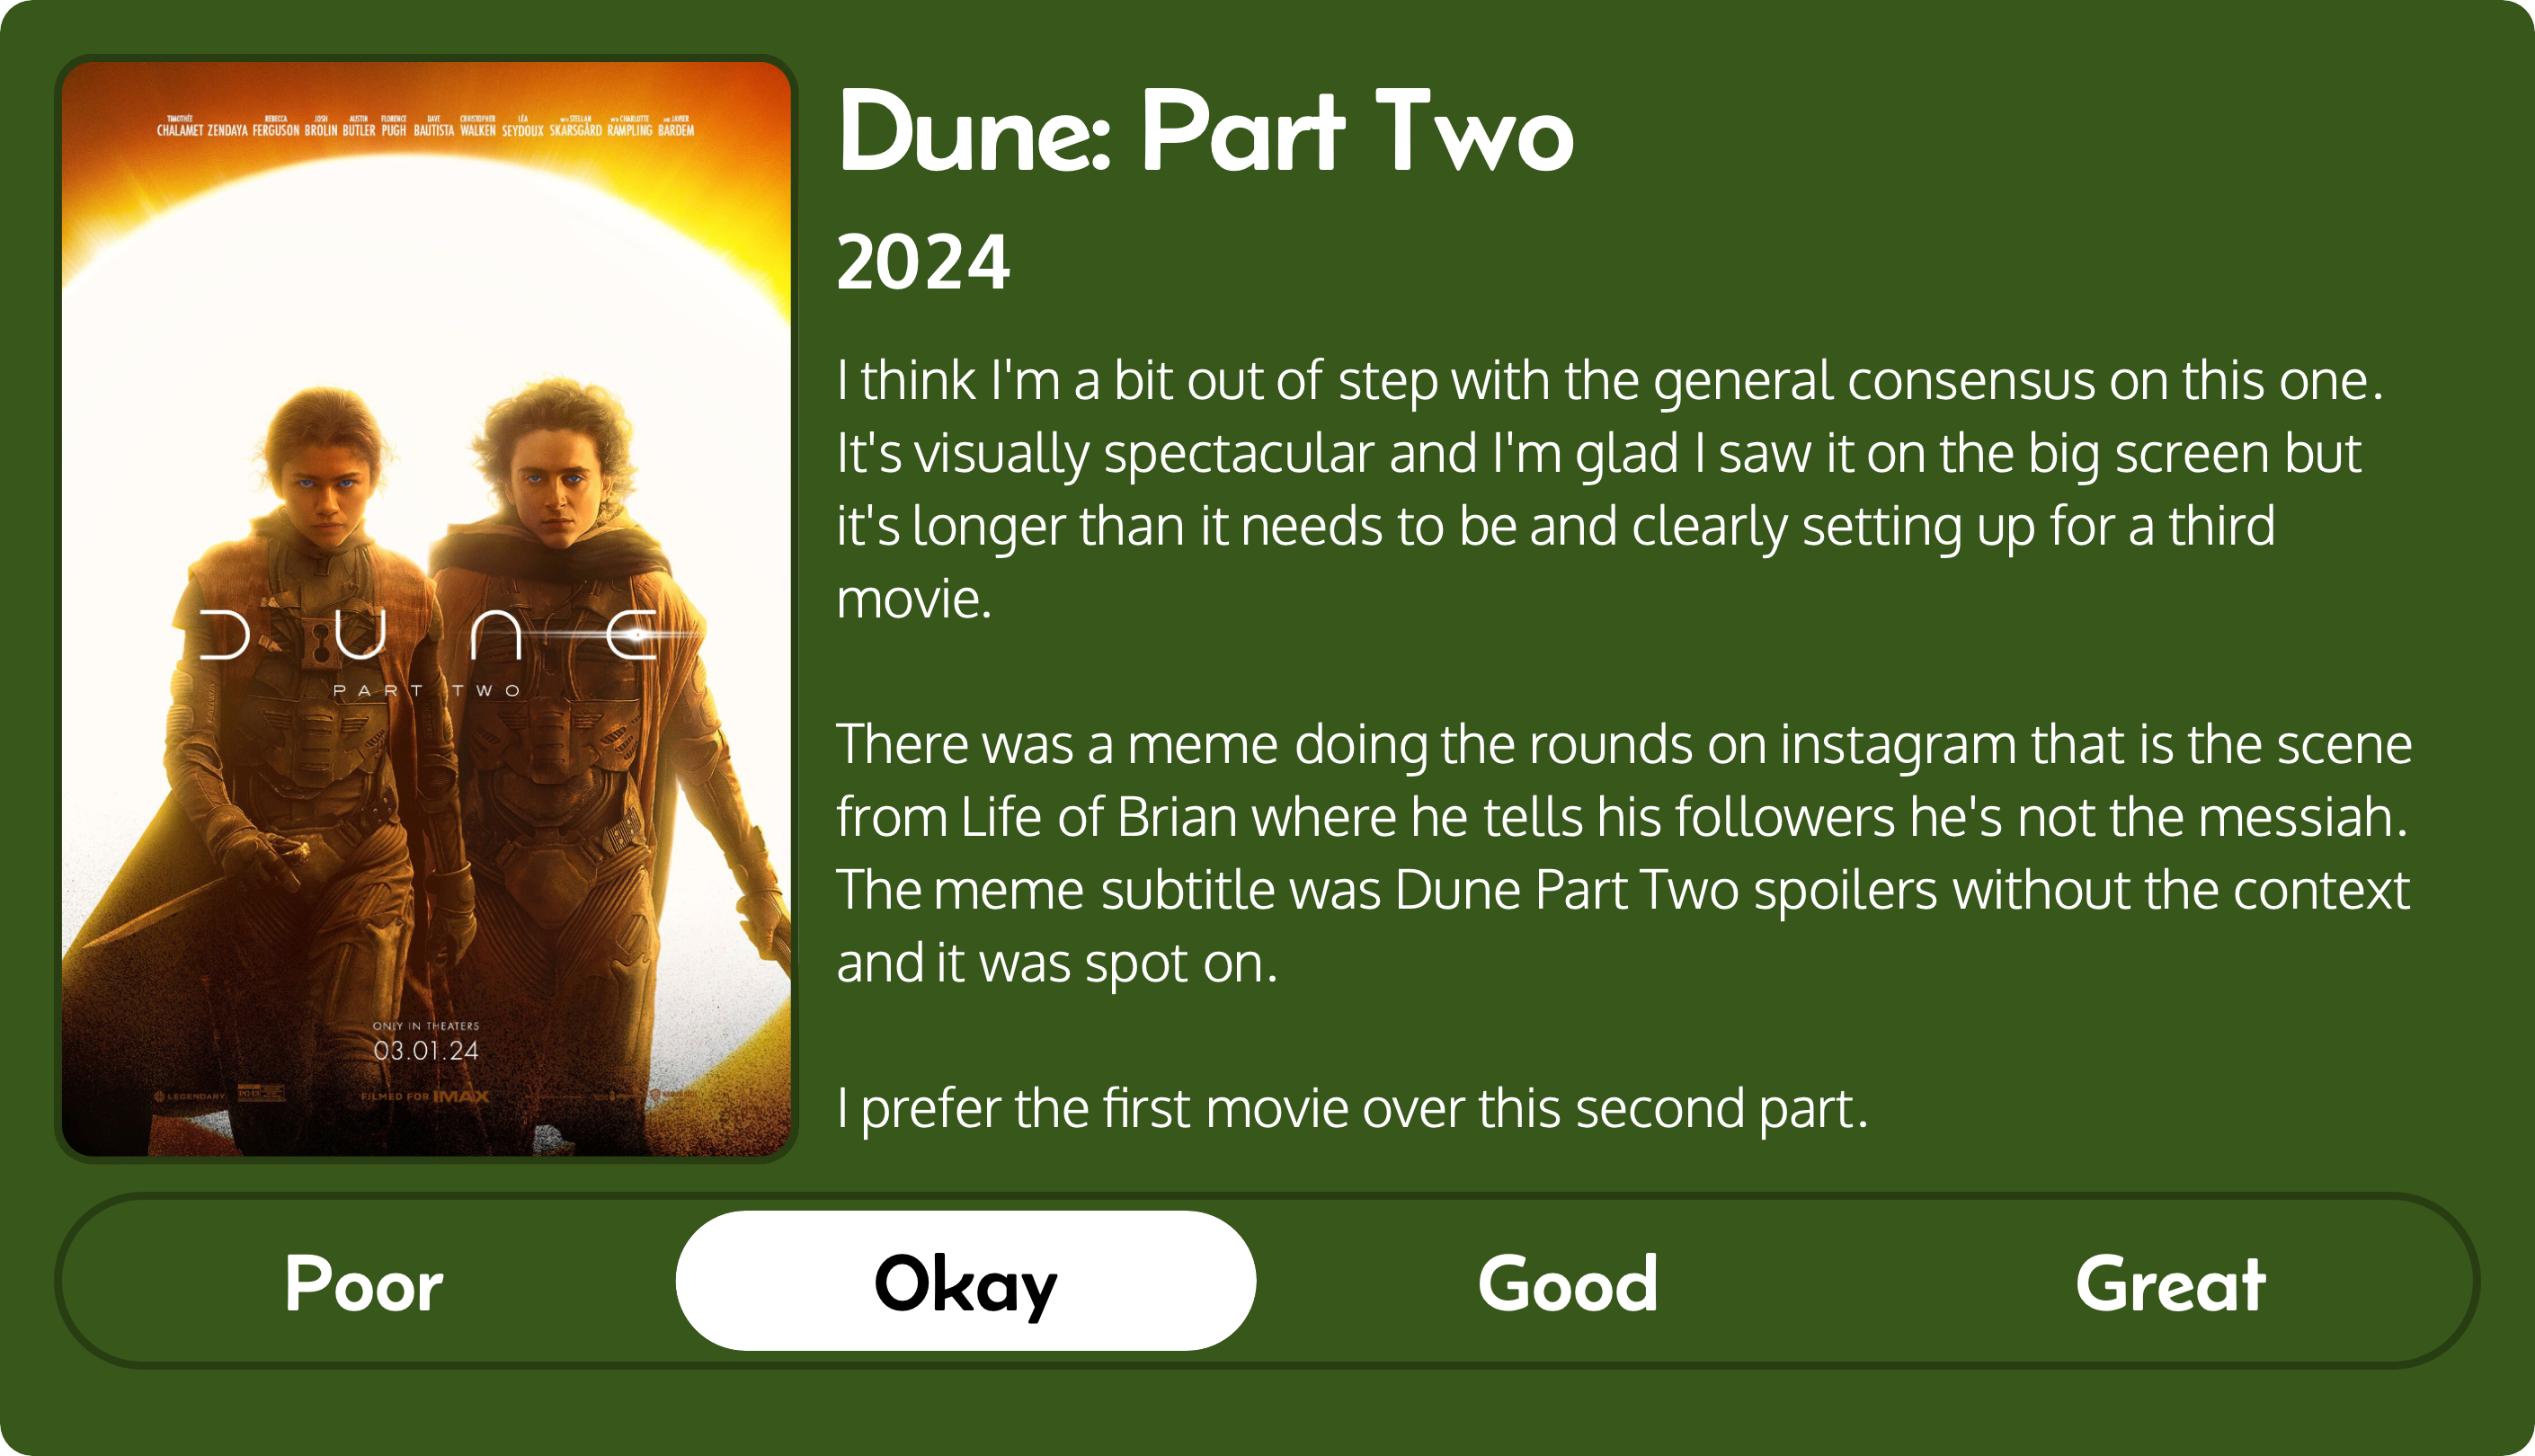 A rectangular image with a review of the movie Dune: Part Two (2024). The movie poster is on the left and the review on the right side. Across the bottom is a rating of Poor Okay Good Great with Okay selected. The review reads: I think I'm a bit out of step with the general consensus on this one. It's visually spectacular and I'm glad I saw it on the big screen but it's longer than it needs to be and clearly setting up for a third movie. There was a meme doing the rounds on instagram that is the scene from Life of Brian where he tells his followers he's not the messiah. The meme subtitle was Dune Part Two spoilers without the context and it was spot on. I prefer the first movie over this second part.